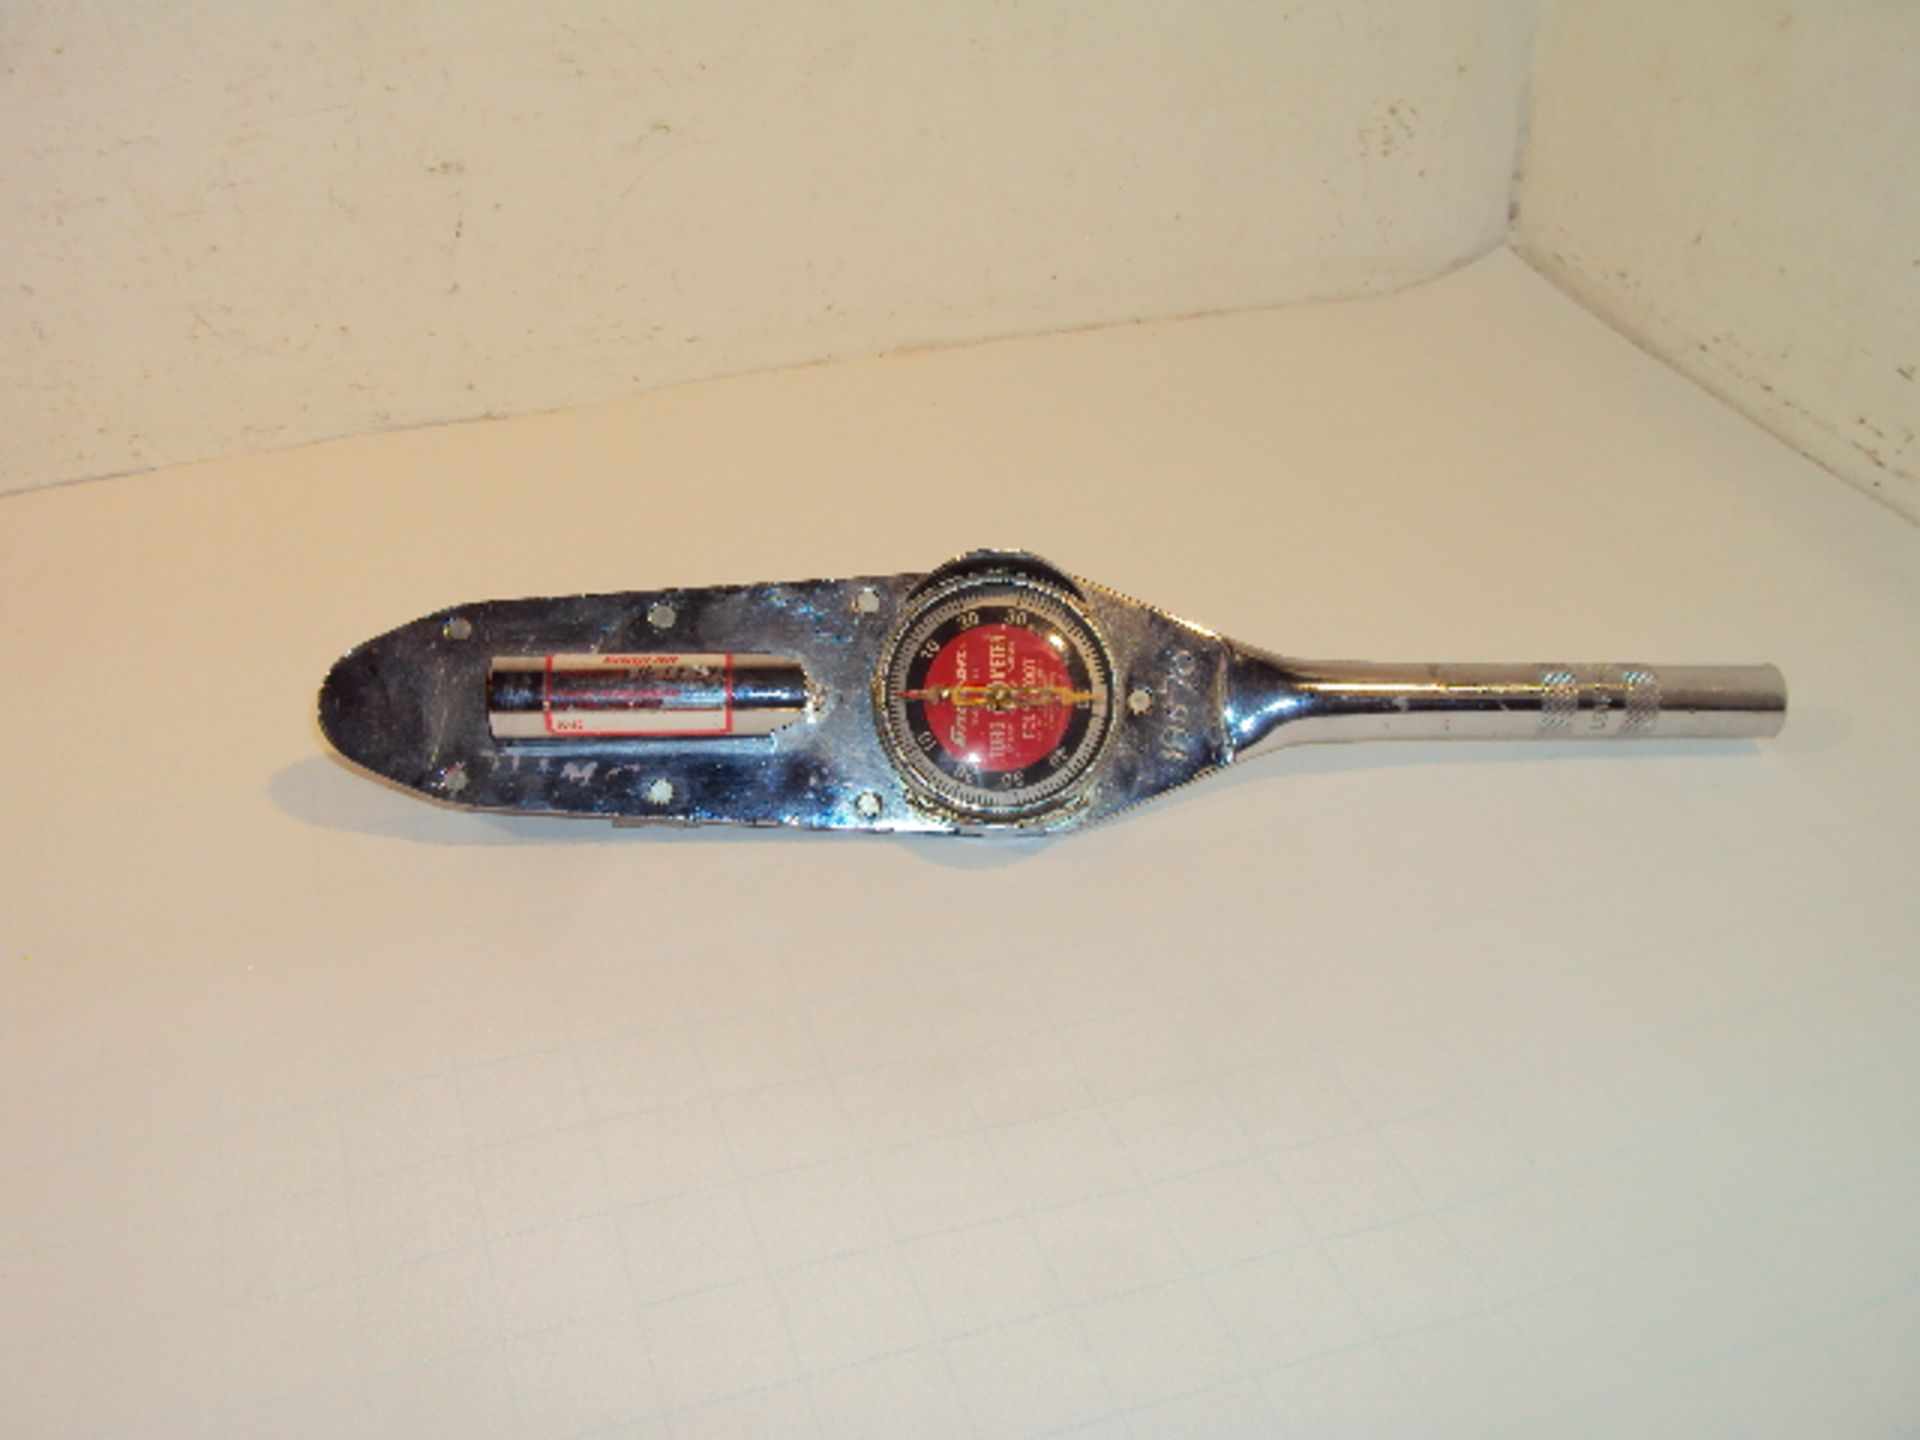 Snap-On TE51FL 0-50 Foot Pound 1/2" Drive Torque Wrench